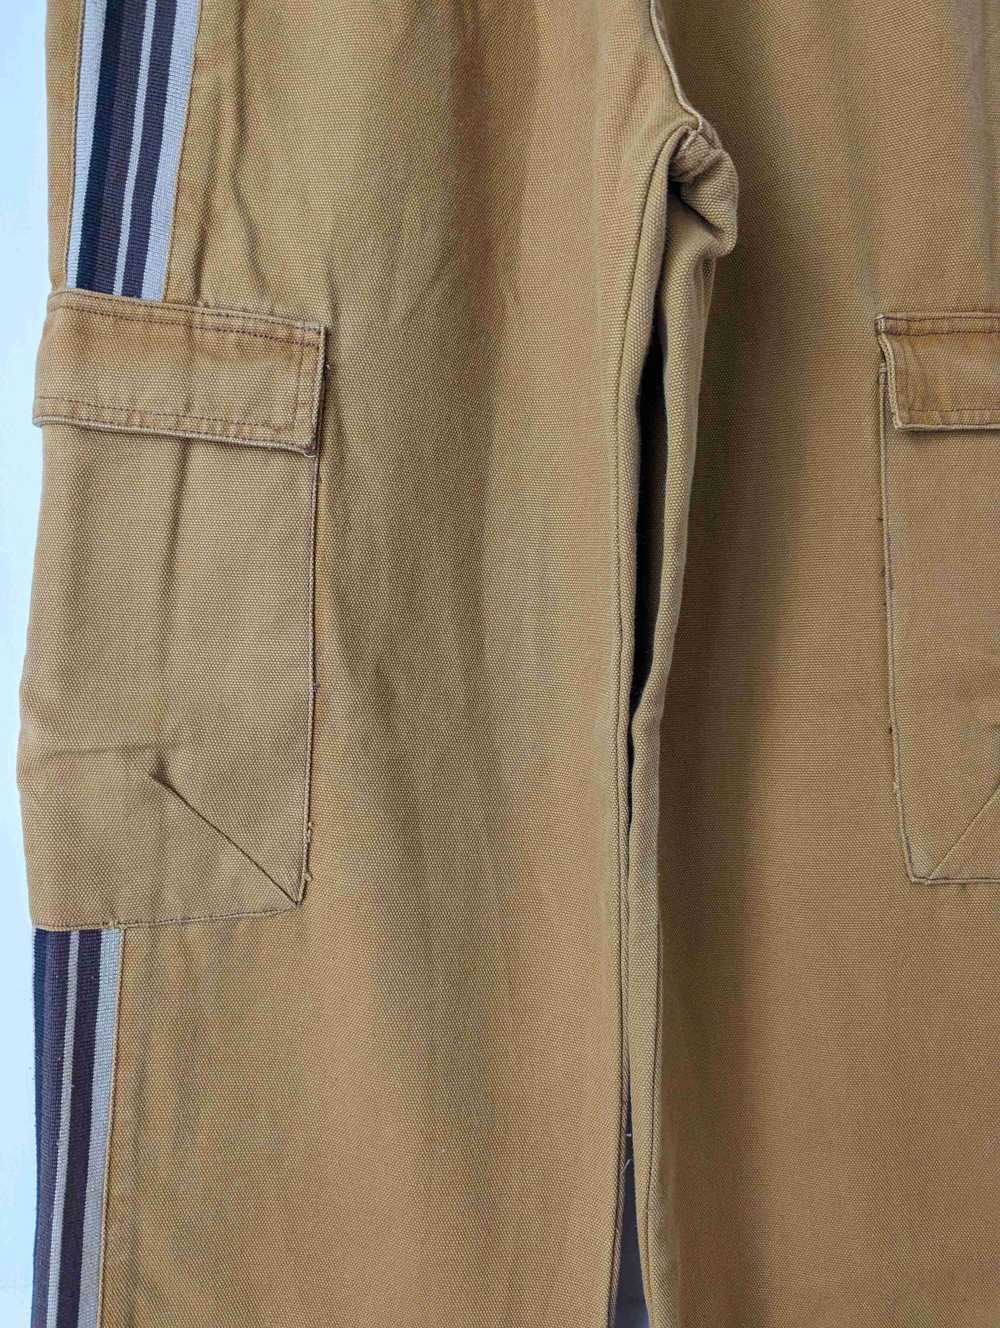 Cotton pants - Cargo/baggy in thick camel cotton … - image 3